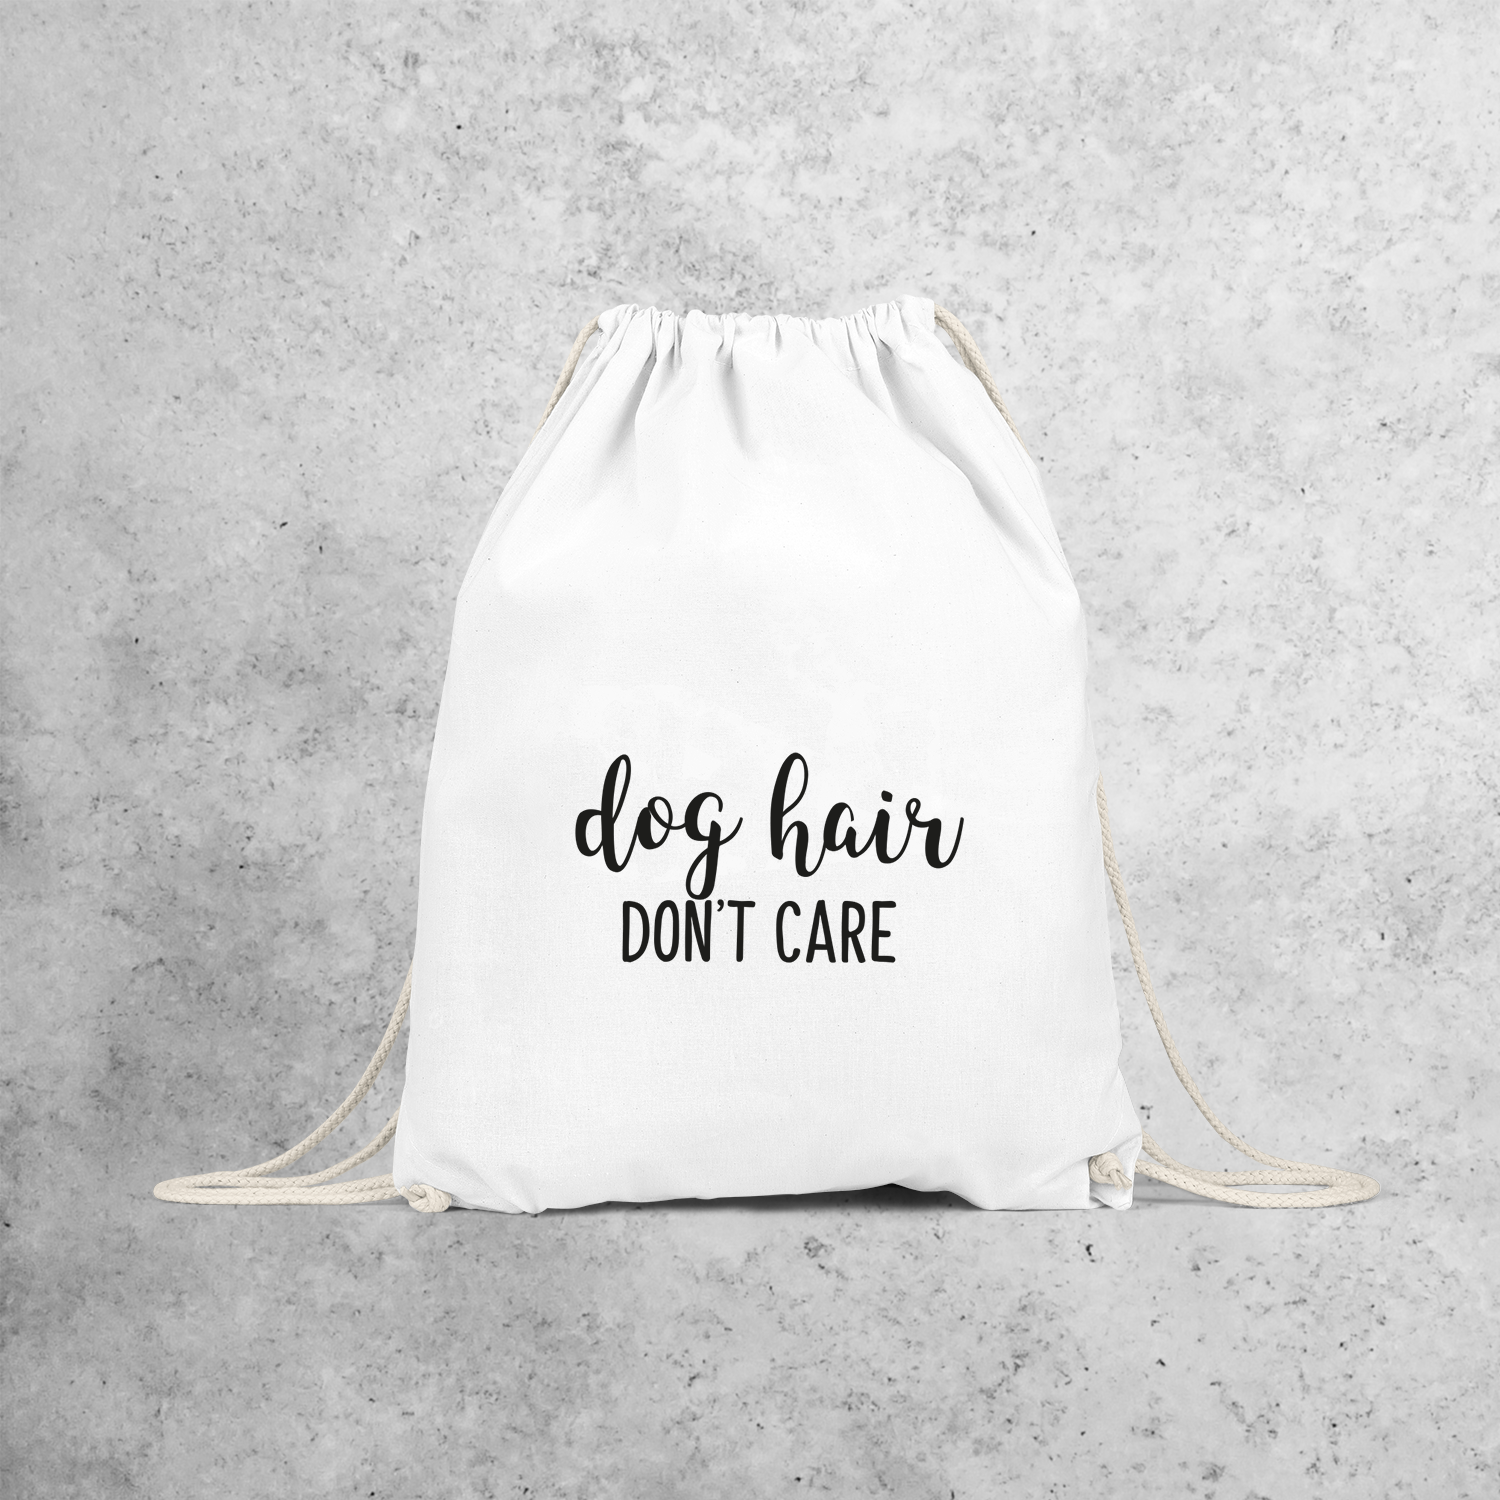 'Dog hair, don't care' backpack